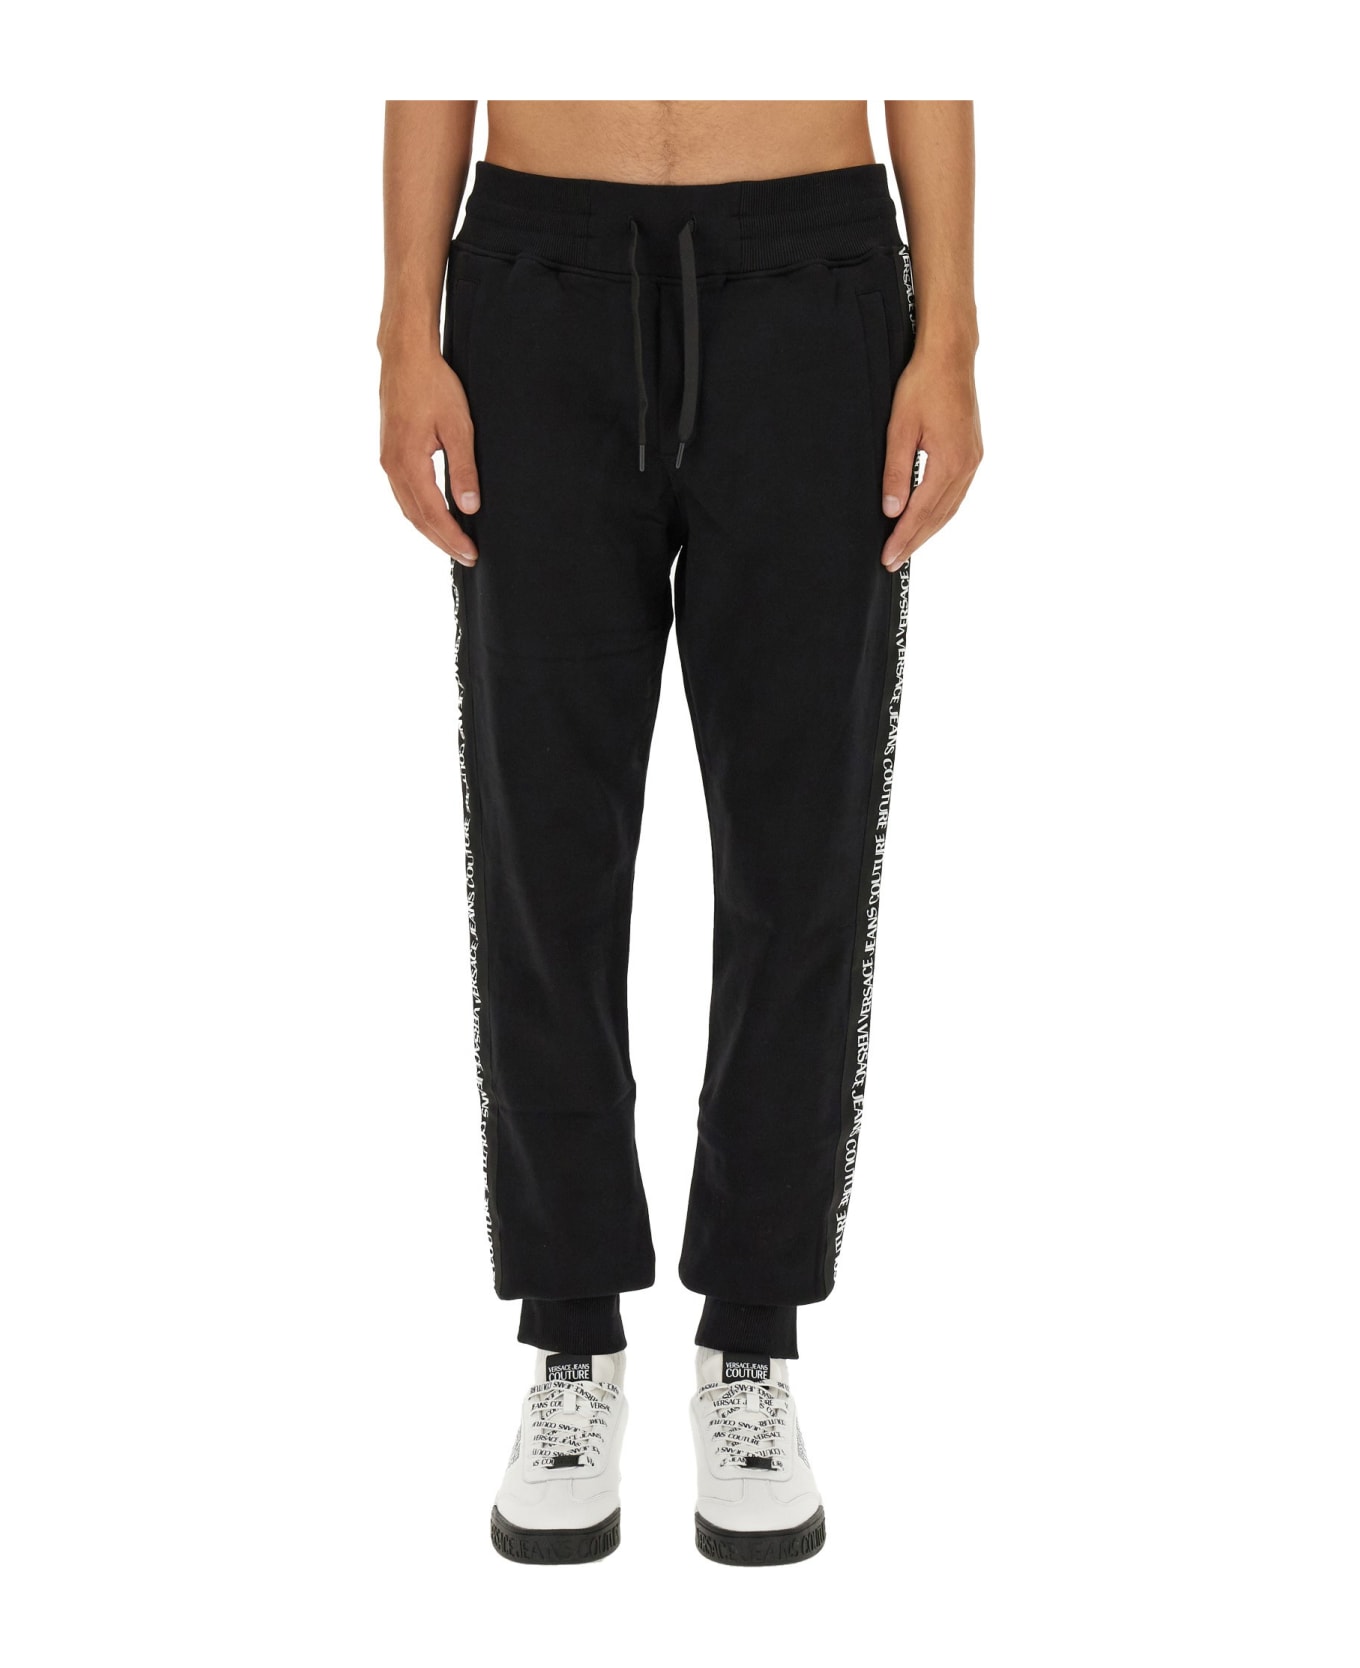 Versace Jeans Couture Sweatpants With Branded Side Stripes - NERO スウェットパンツ